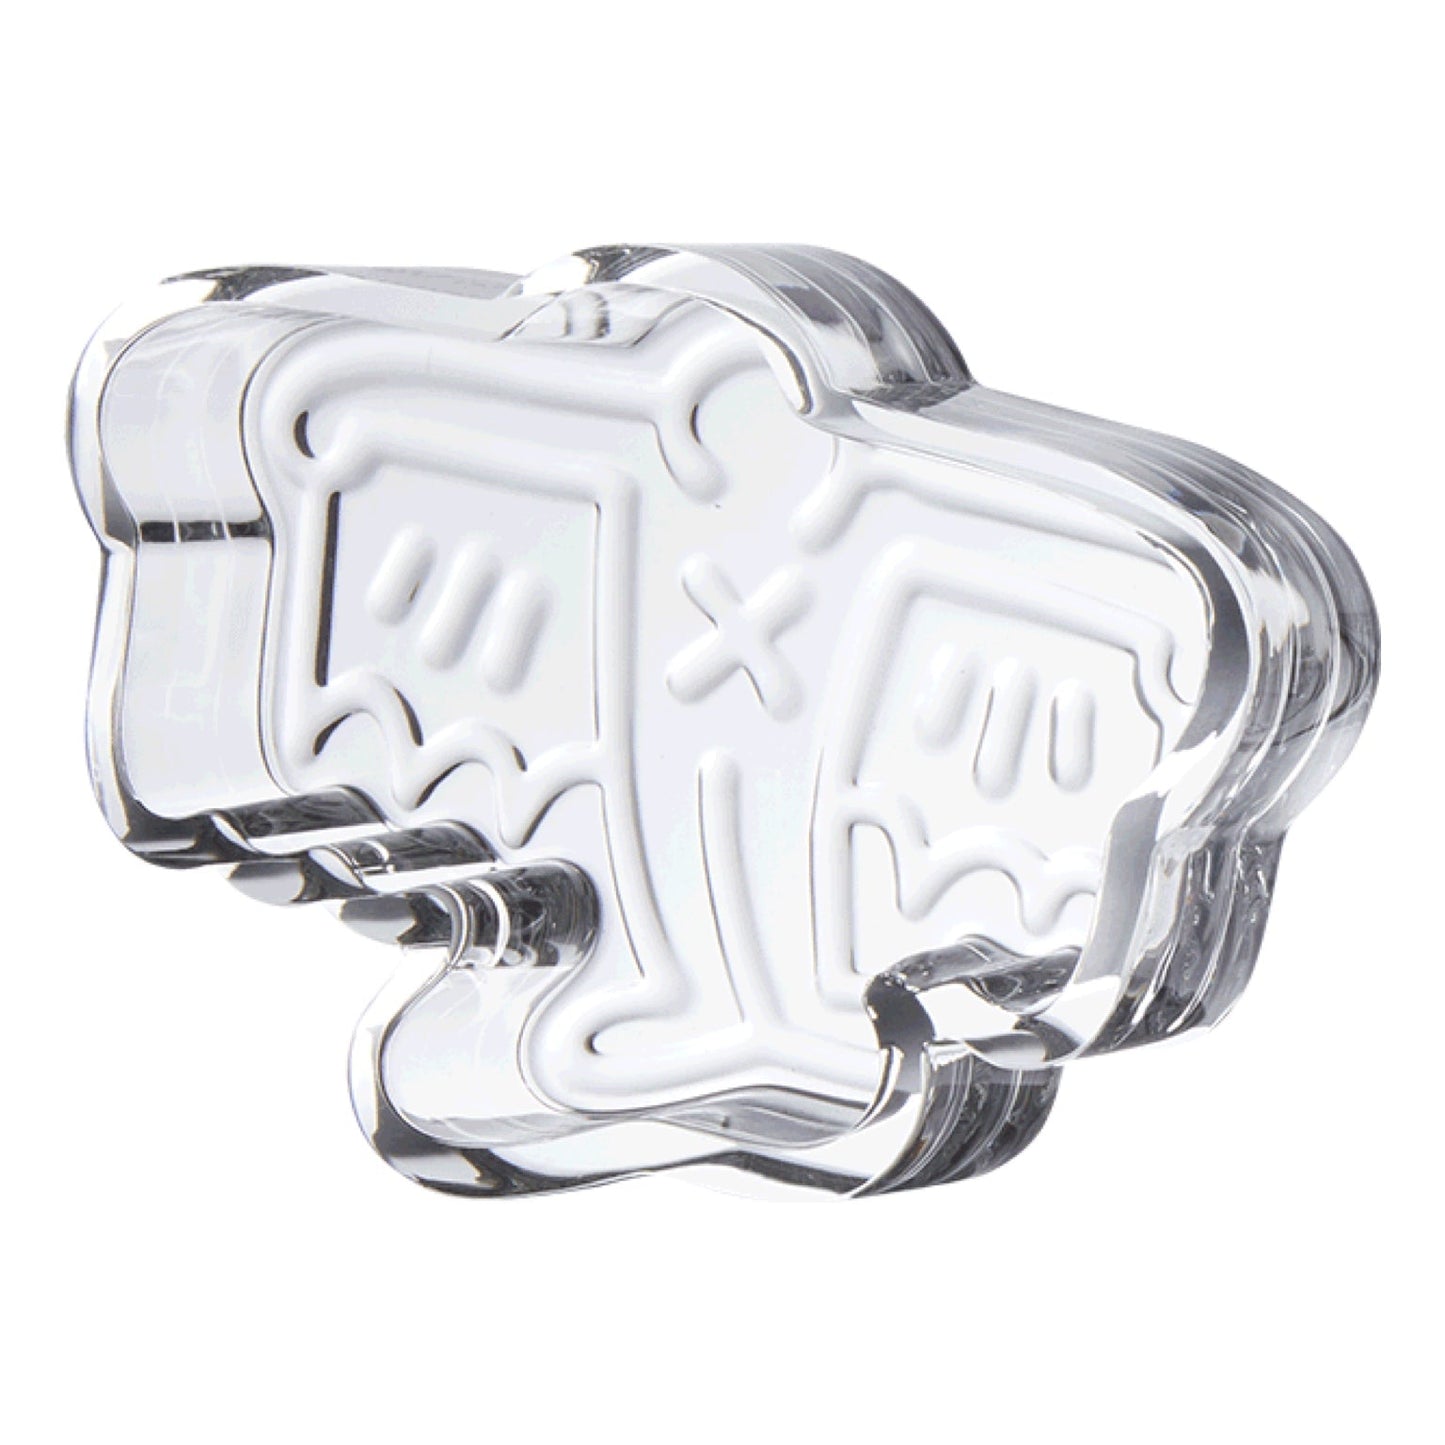 K. Haring “Bat Man” Crystal Glass Catchall by K. Haring Collection | Mission Dispensary